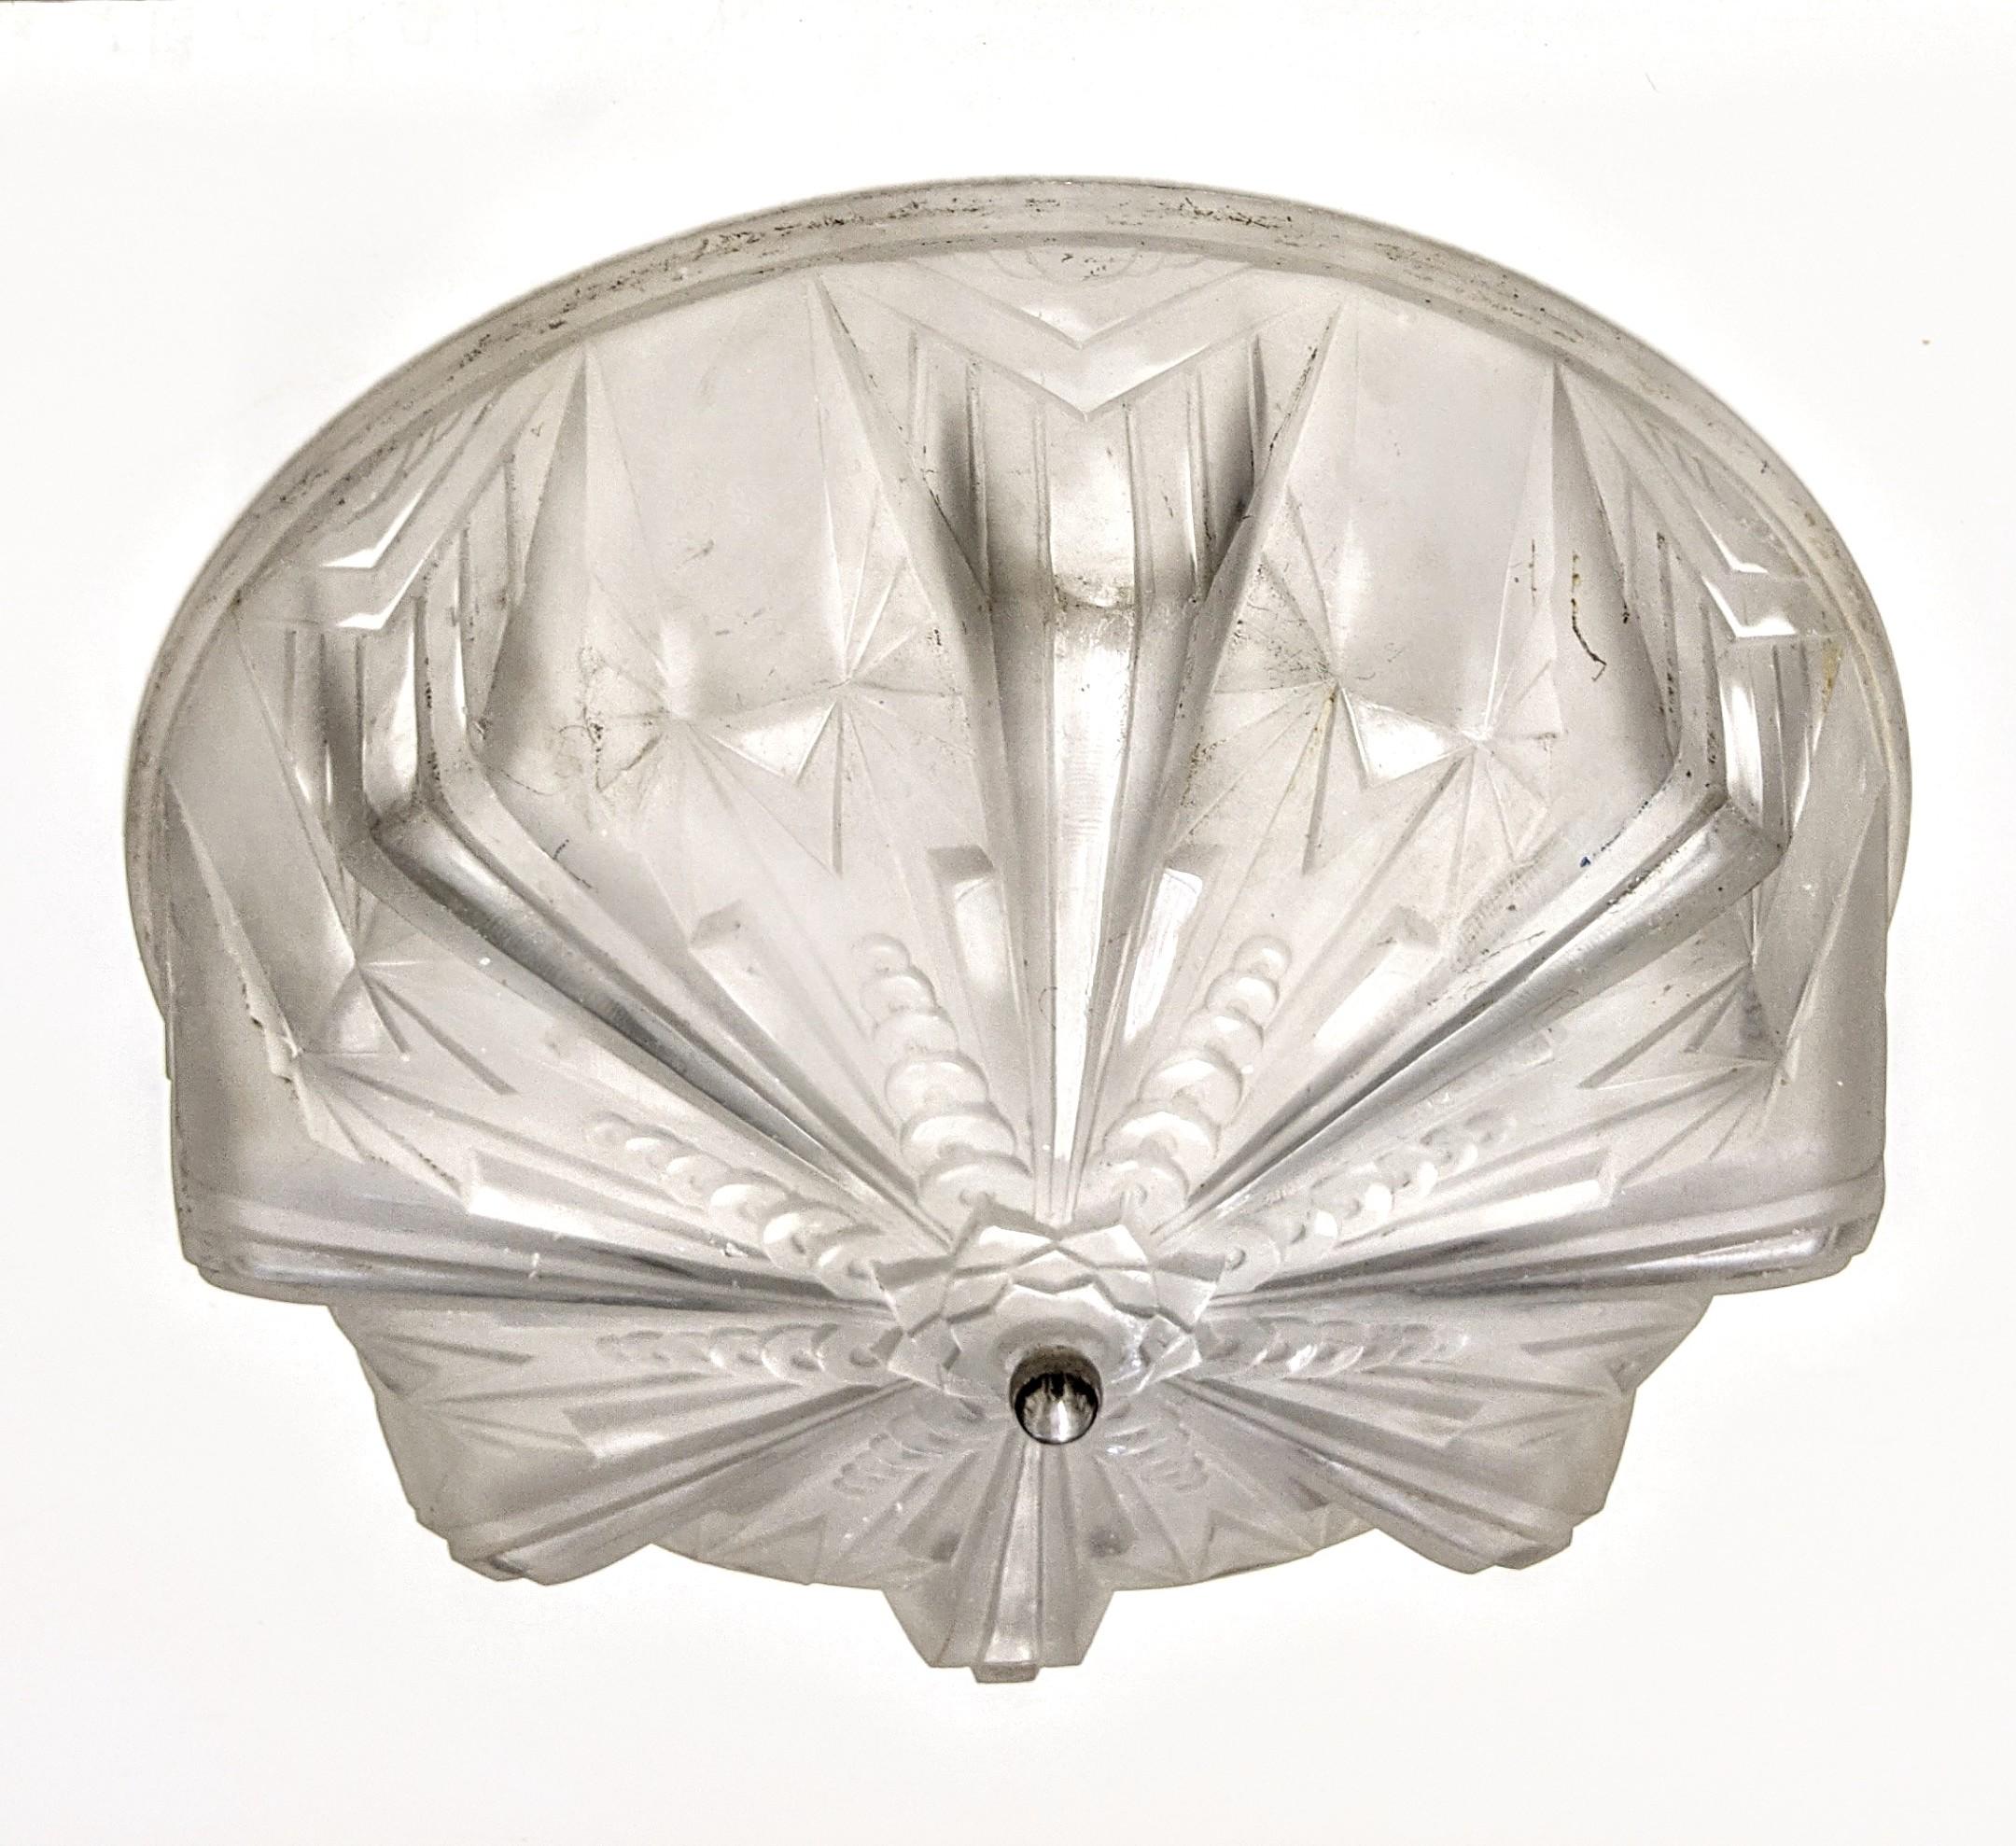 A French Art Deco flush mount was created by the French artist 